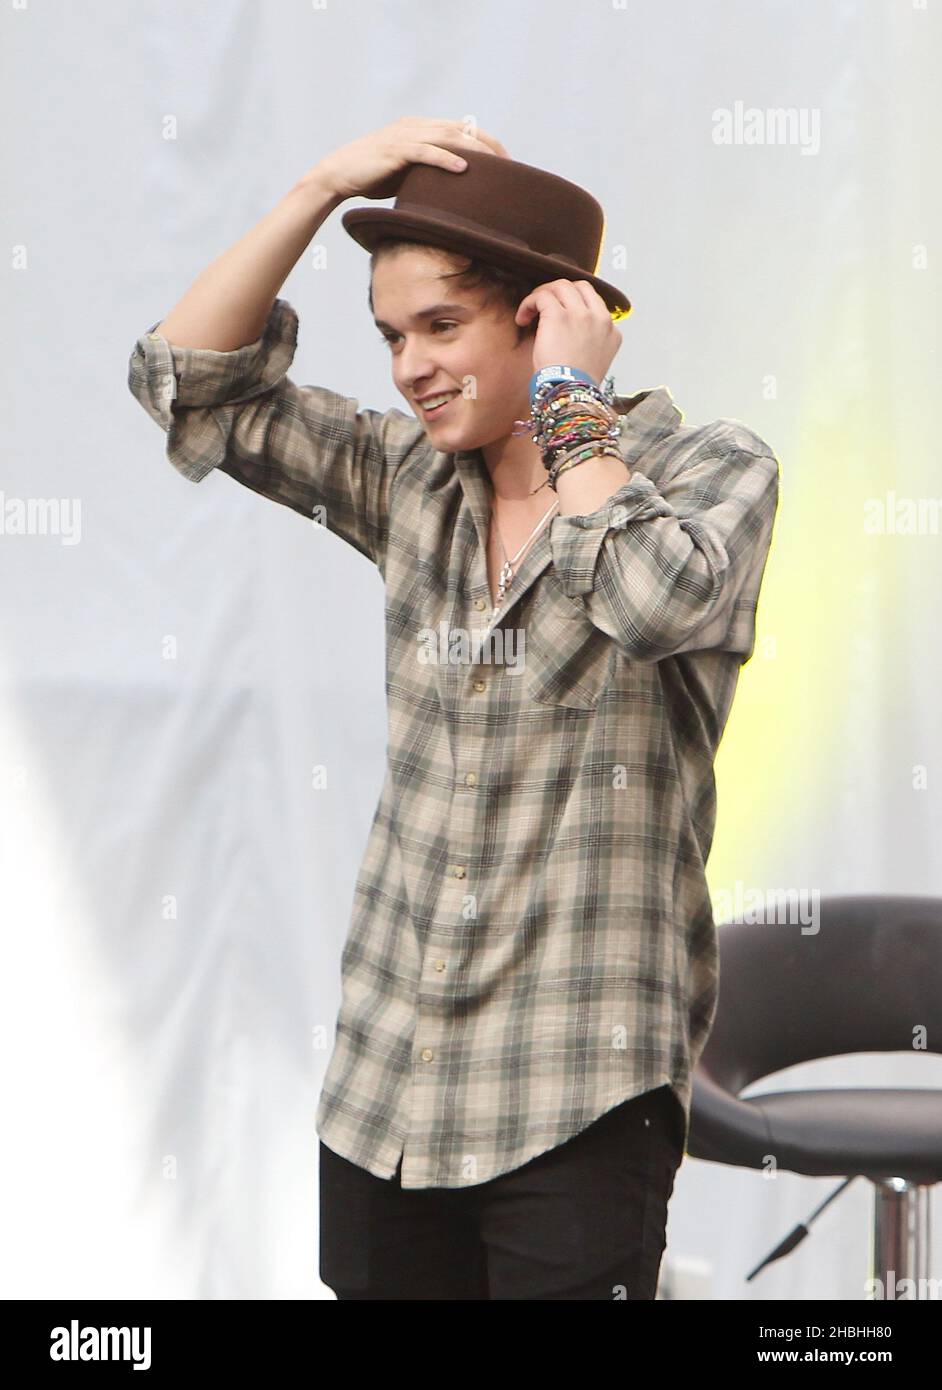 Bradley Simpson of The Vamps performing at Westfield White City in London. Stock Photo